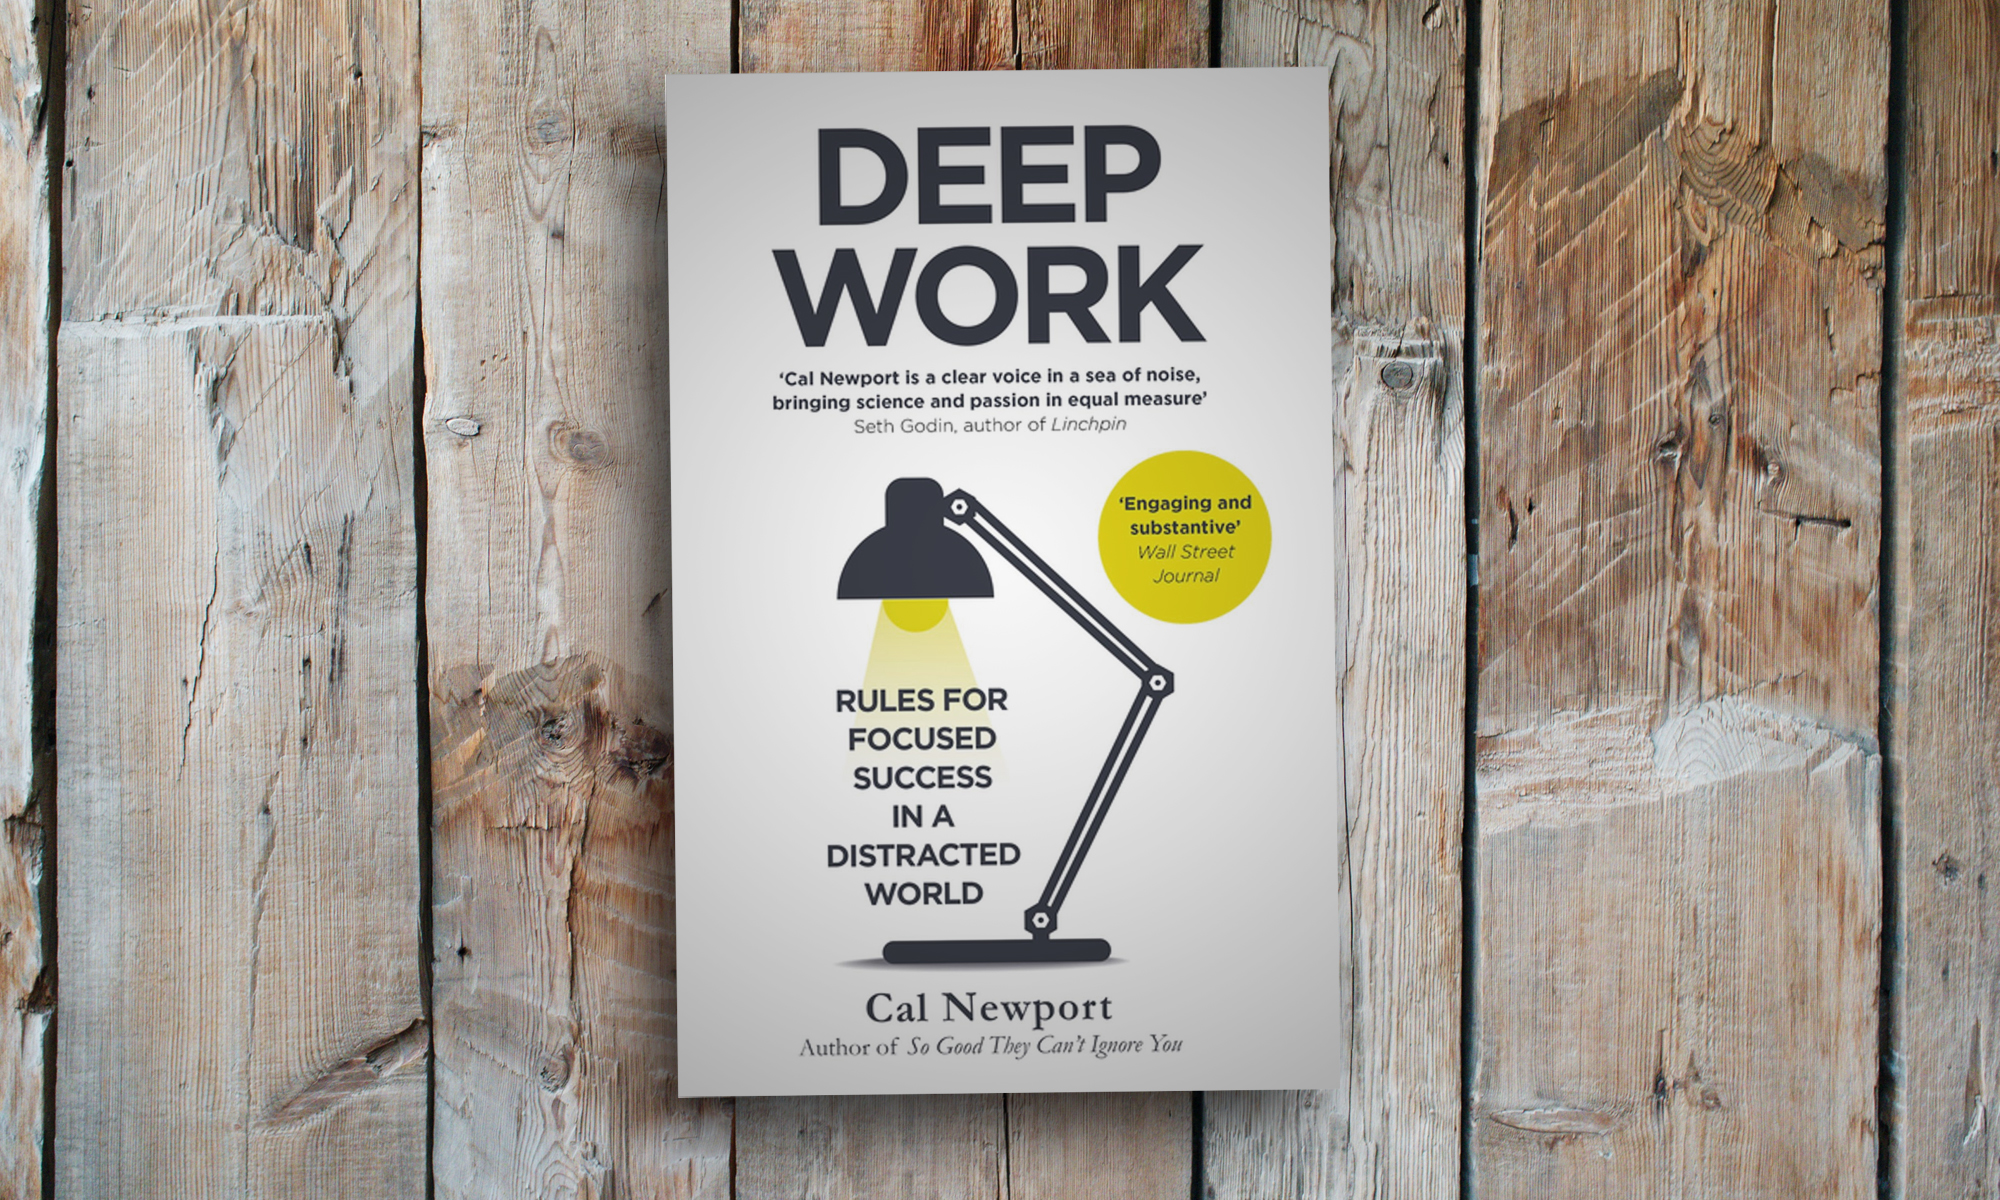 Cover of Cal Newports book "Deep Work"